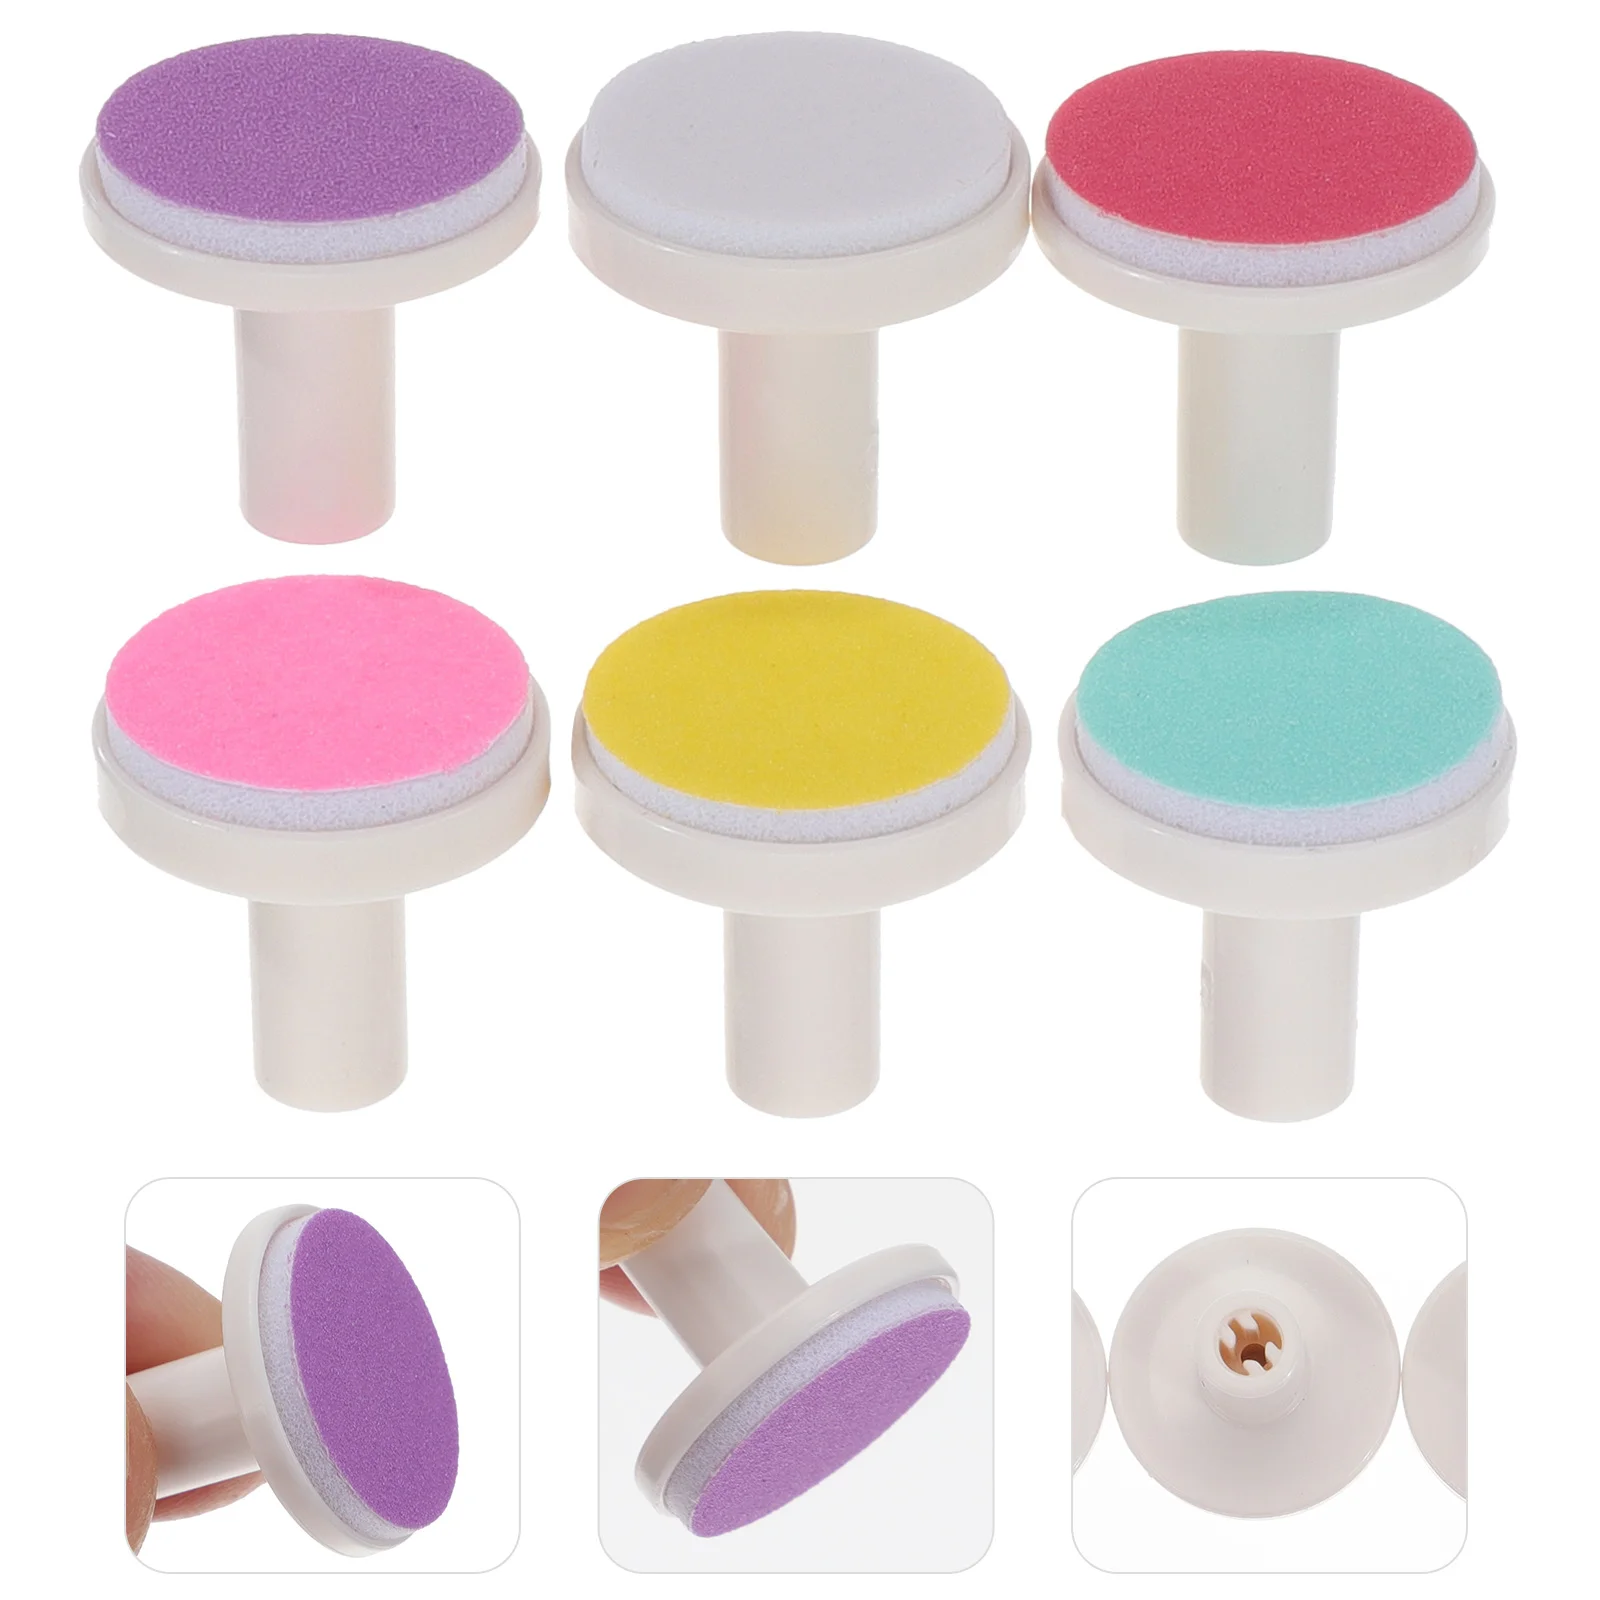 24 Pcs Electric Nail File Replacement Pads Baby Grooming Kit Grinding Heads Kids Trimmer Manicure